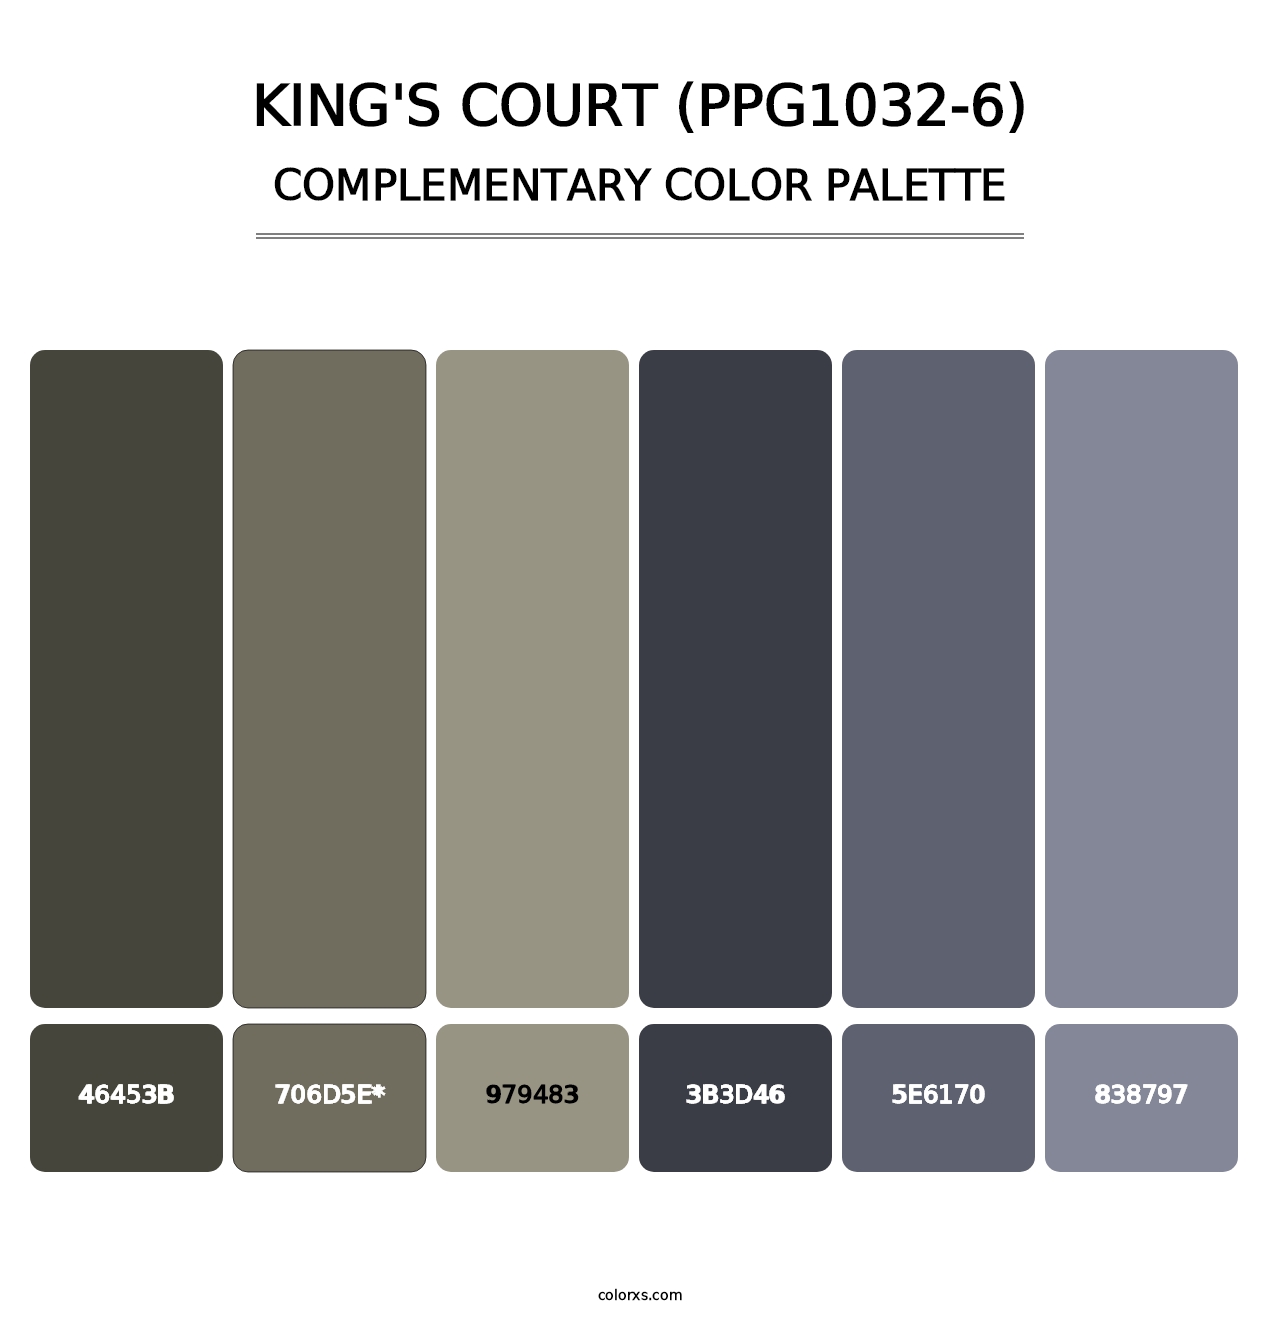 King's Court (PPG1032-6) - Complementary Color Palette